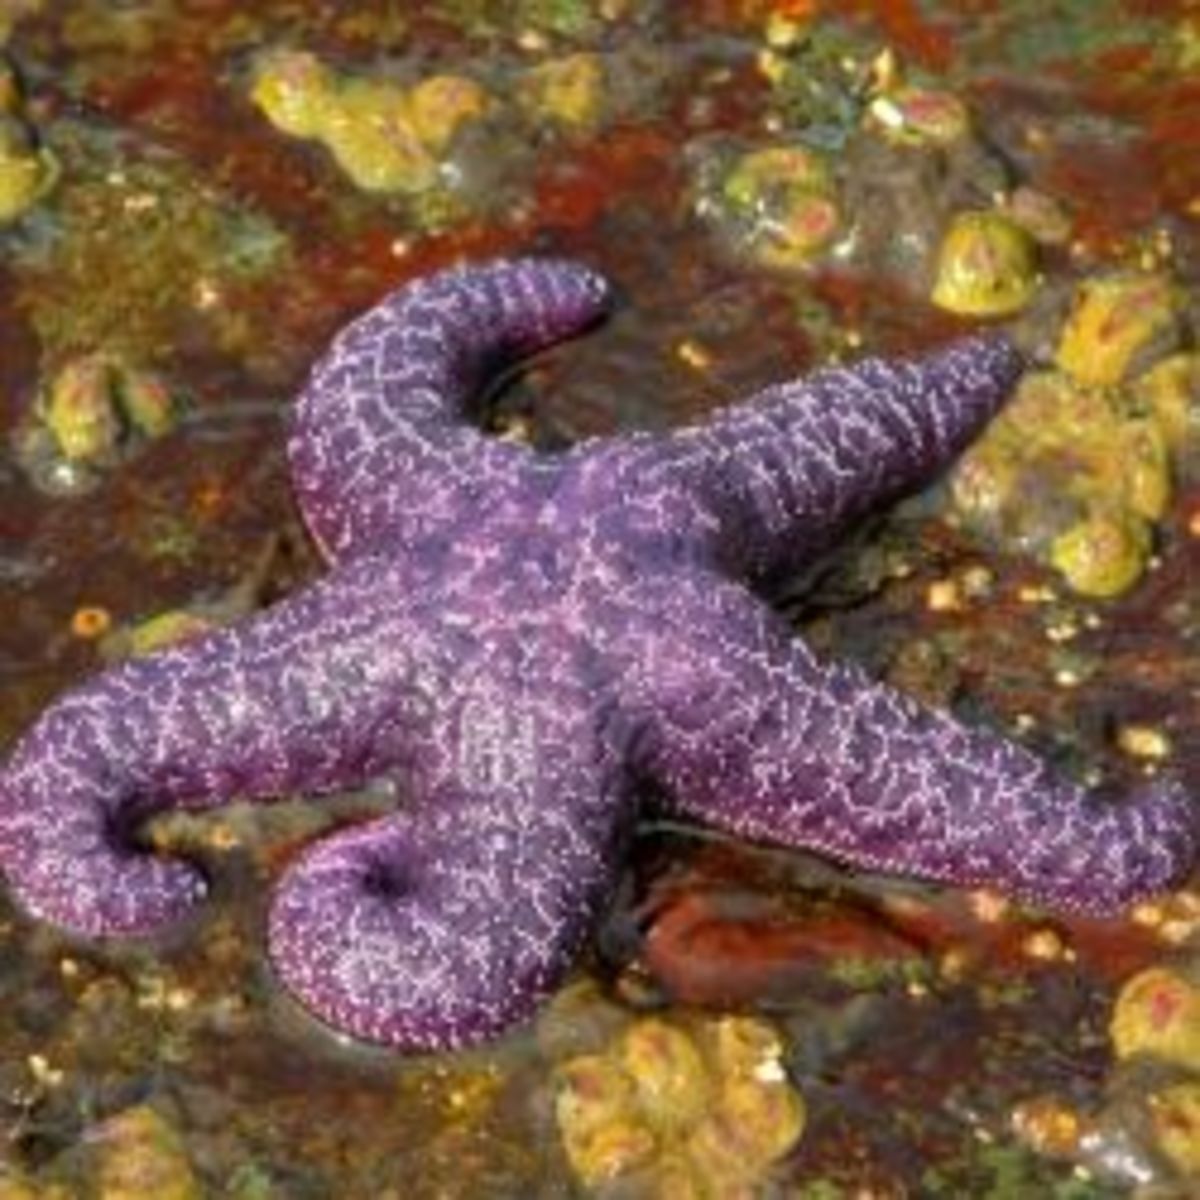 Starfish in a purple hue is not quite the same as a purple star award, but goes with the sea creature theme of the Squids.